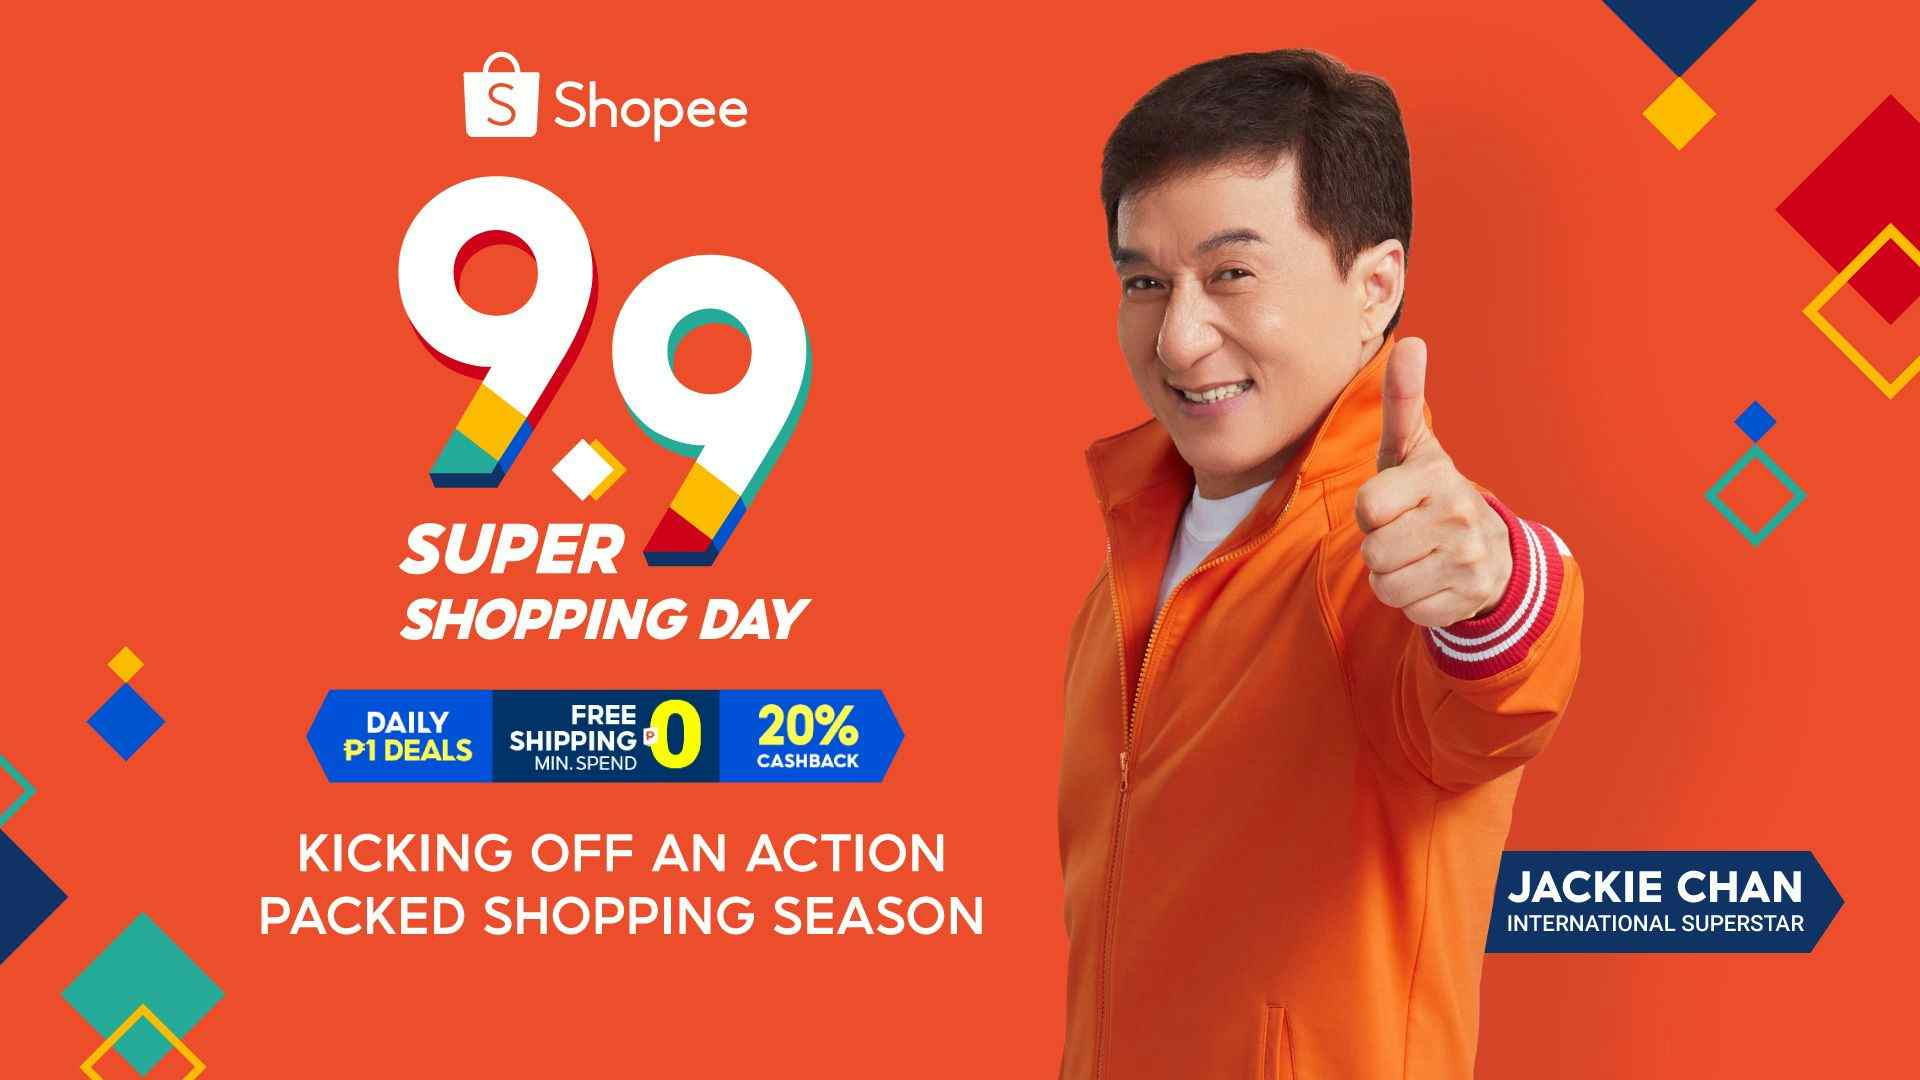 Jackie Chan high kicks Shopee 9.9 Super Shopping Day photo from UNBOX PH